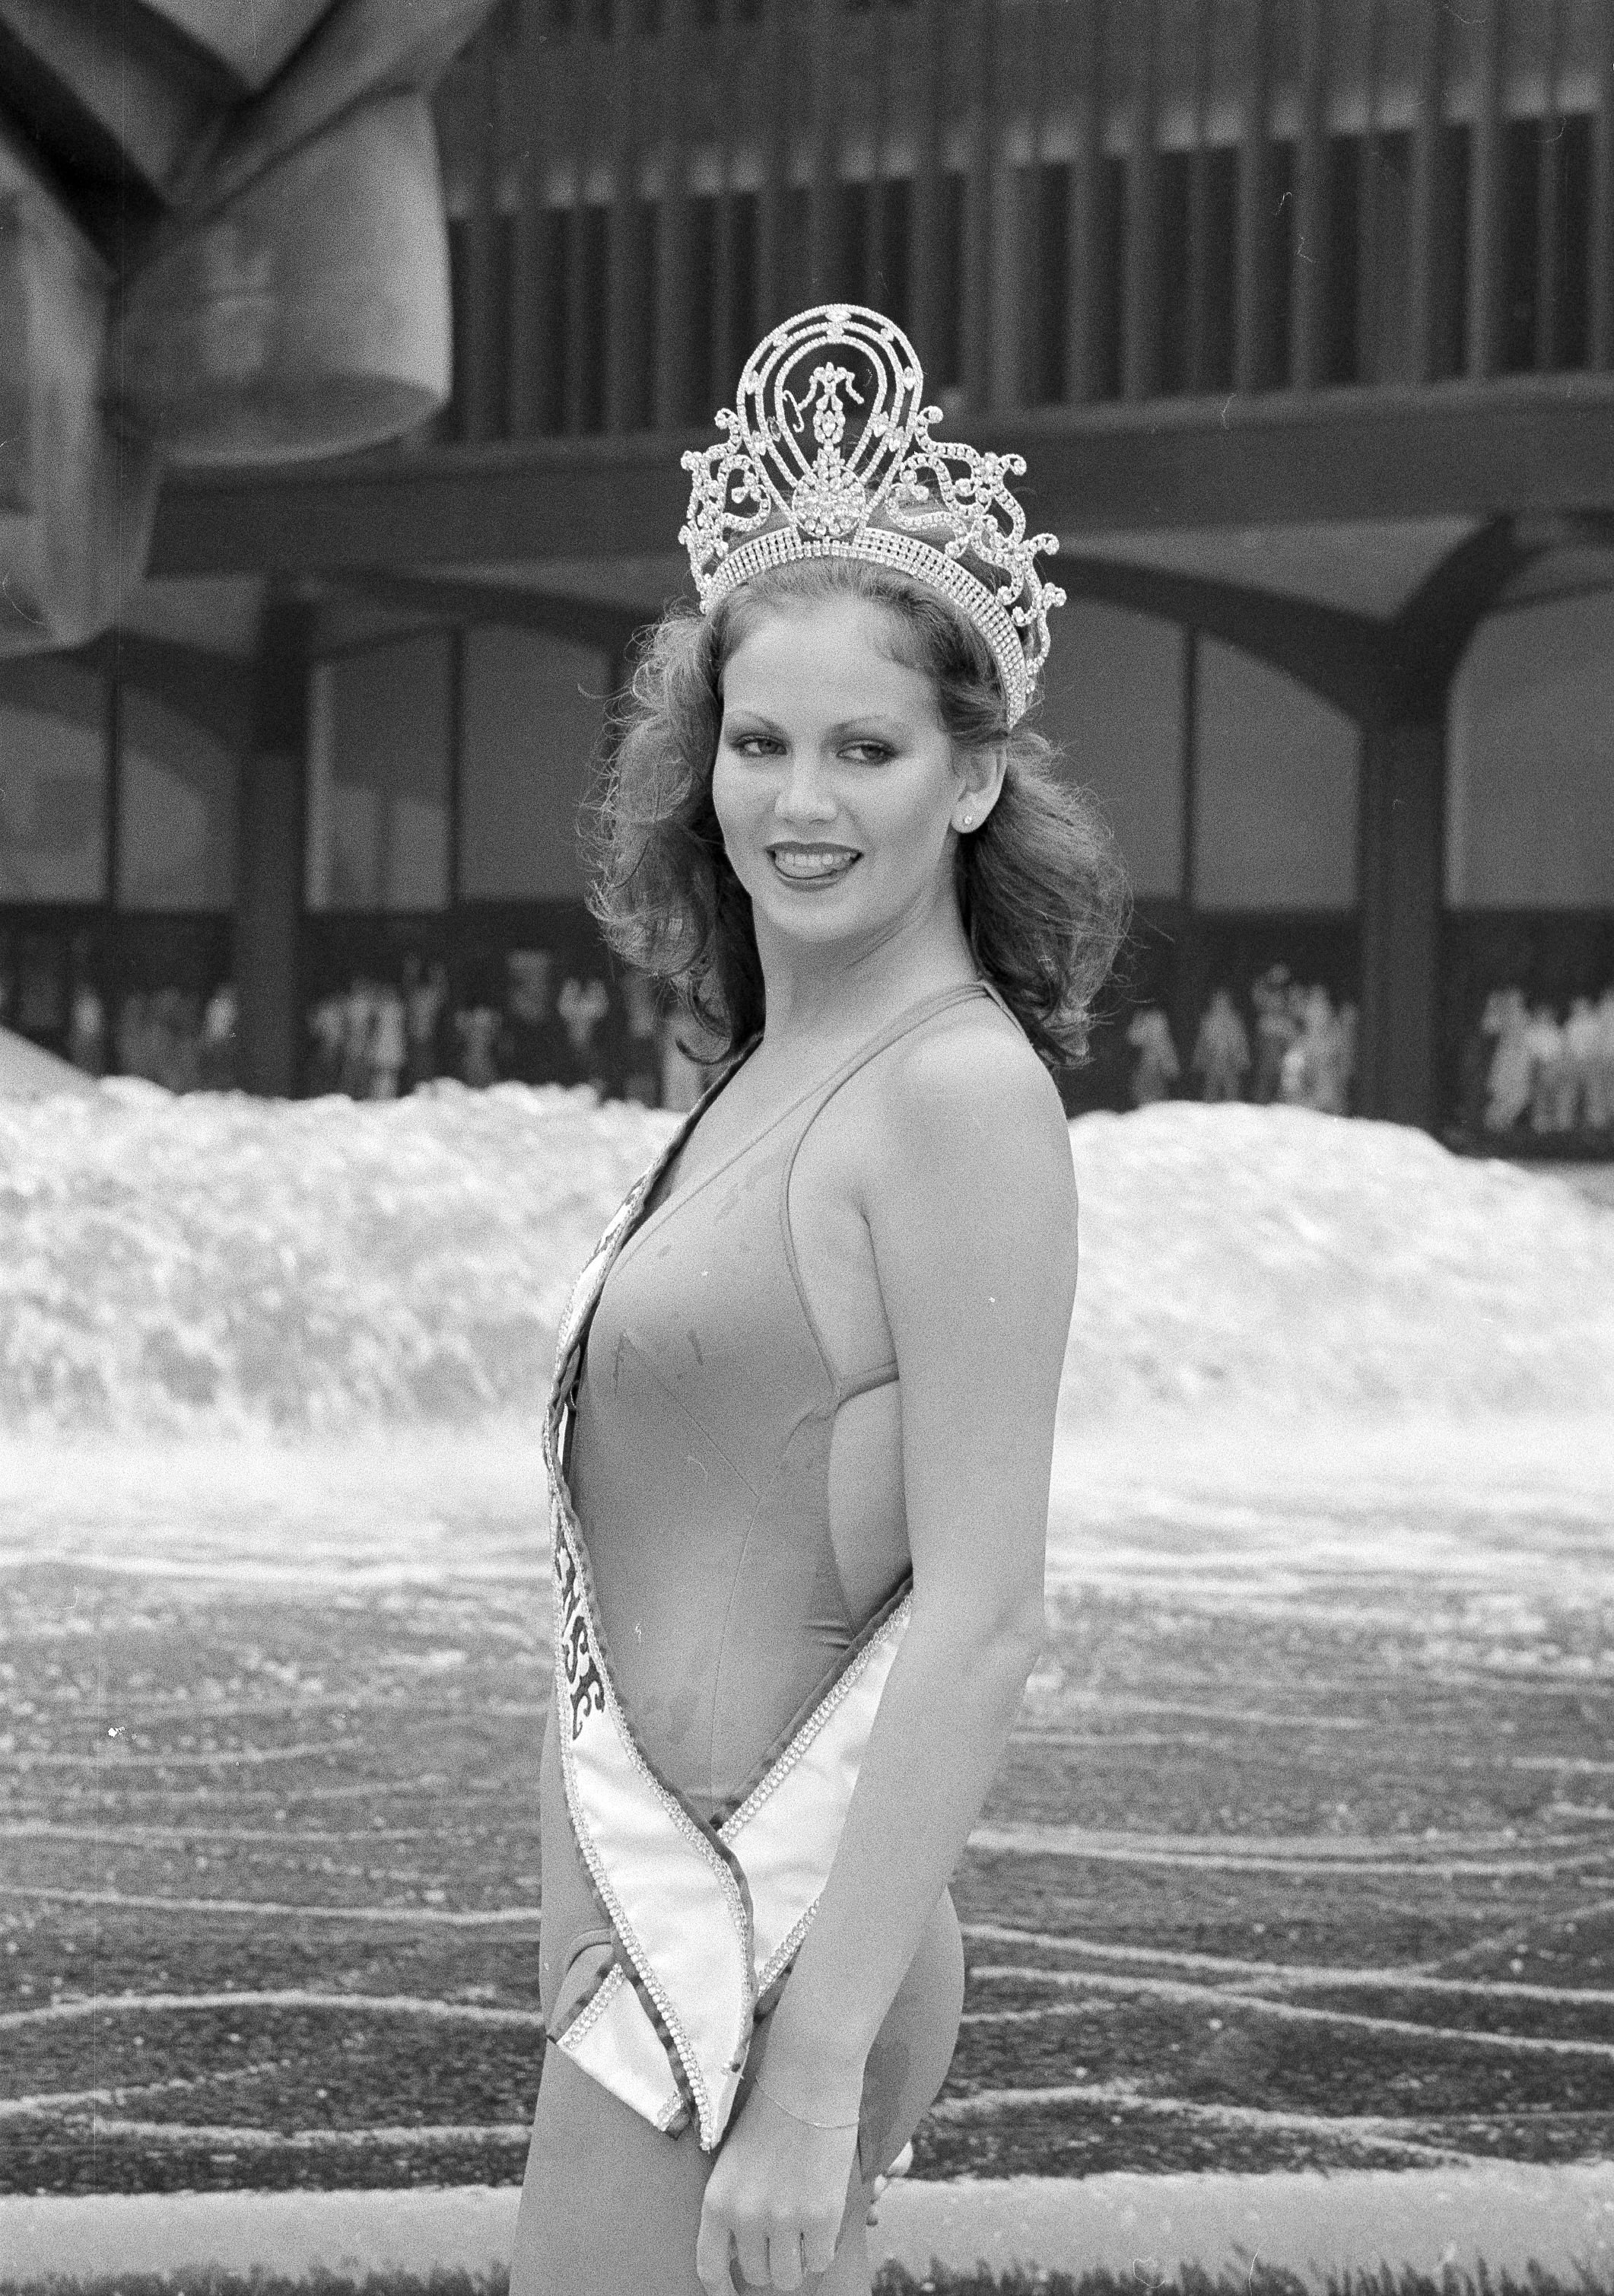  Margaret Gardiner, 18, Miss Universe 1978 poses for photographers in front of a fountain at the World Trade Center in New York, Aug. 1, 1978. Miss Gardiner went to the building in hopes of seeing the view from the top, however, there was no view bec